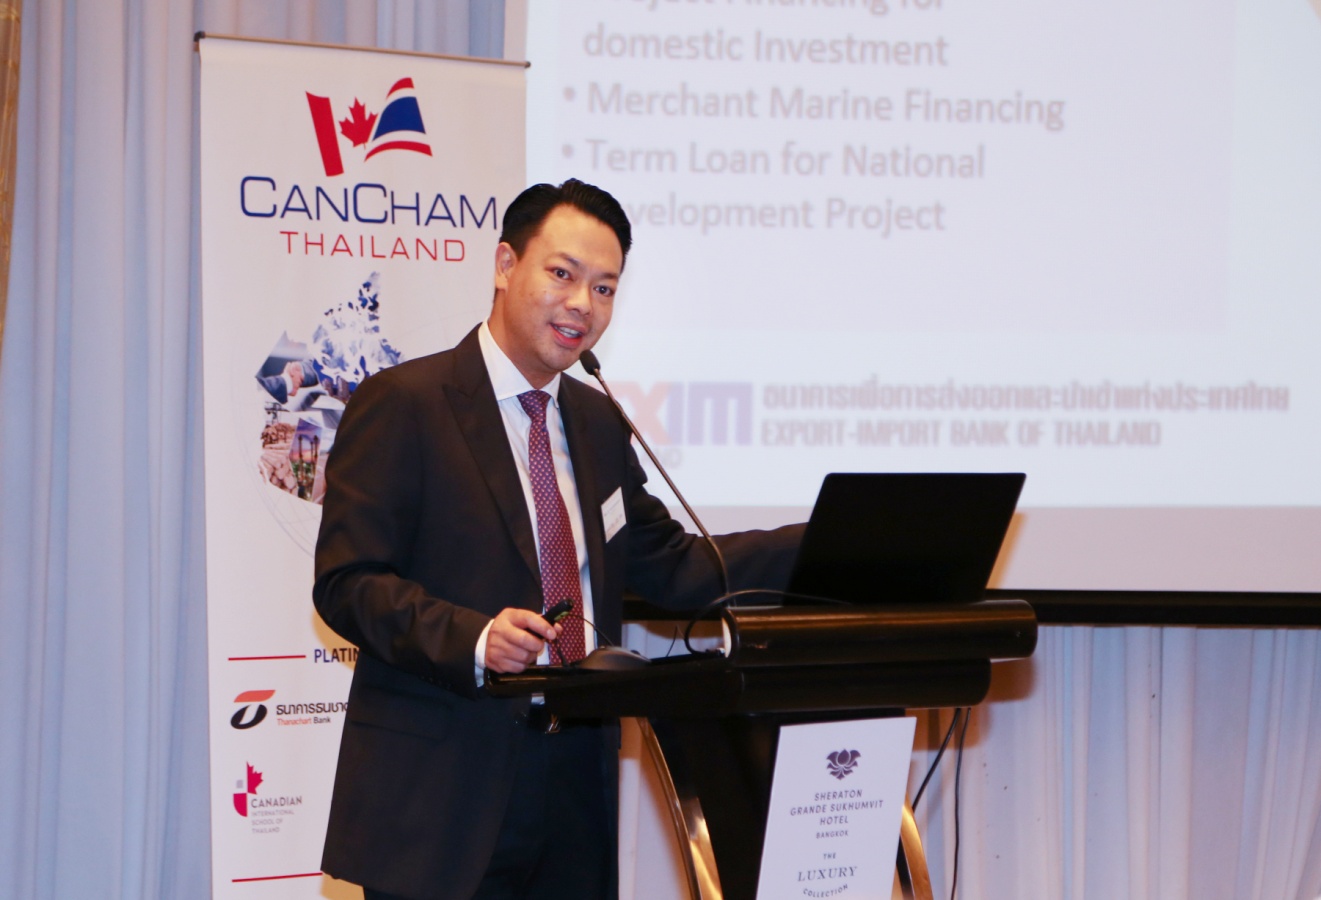 EXIM Thailand Speaks on Thai-Canadian Trade and Investment Promotion